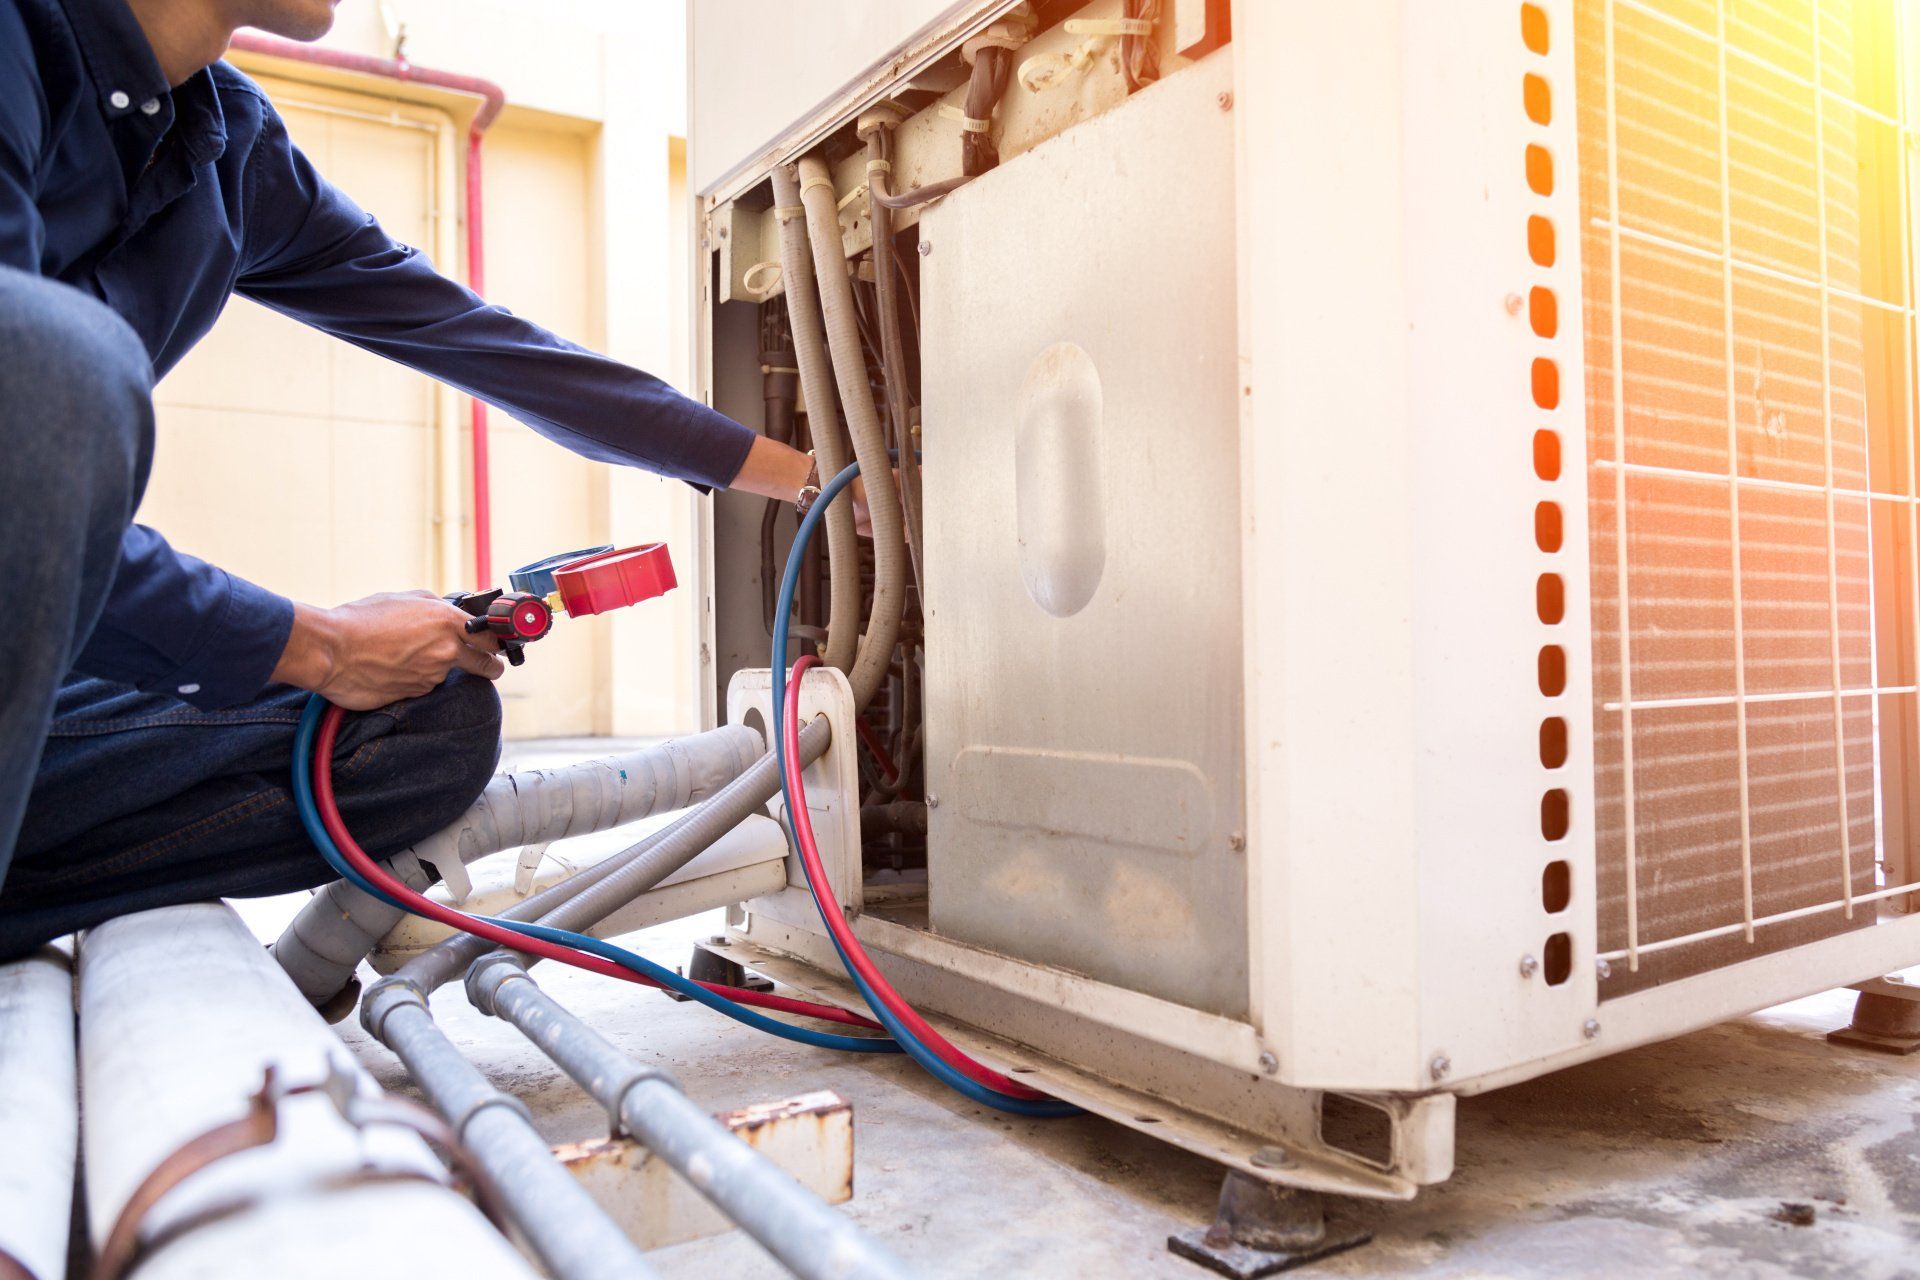 An HVAC technician installing a residential heating, ventilation, and air conditioning (HVAC) system.